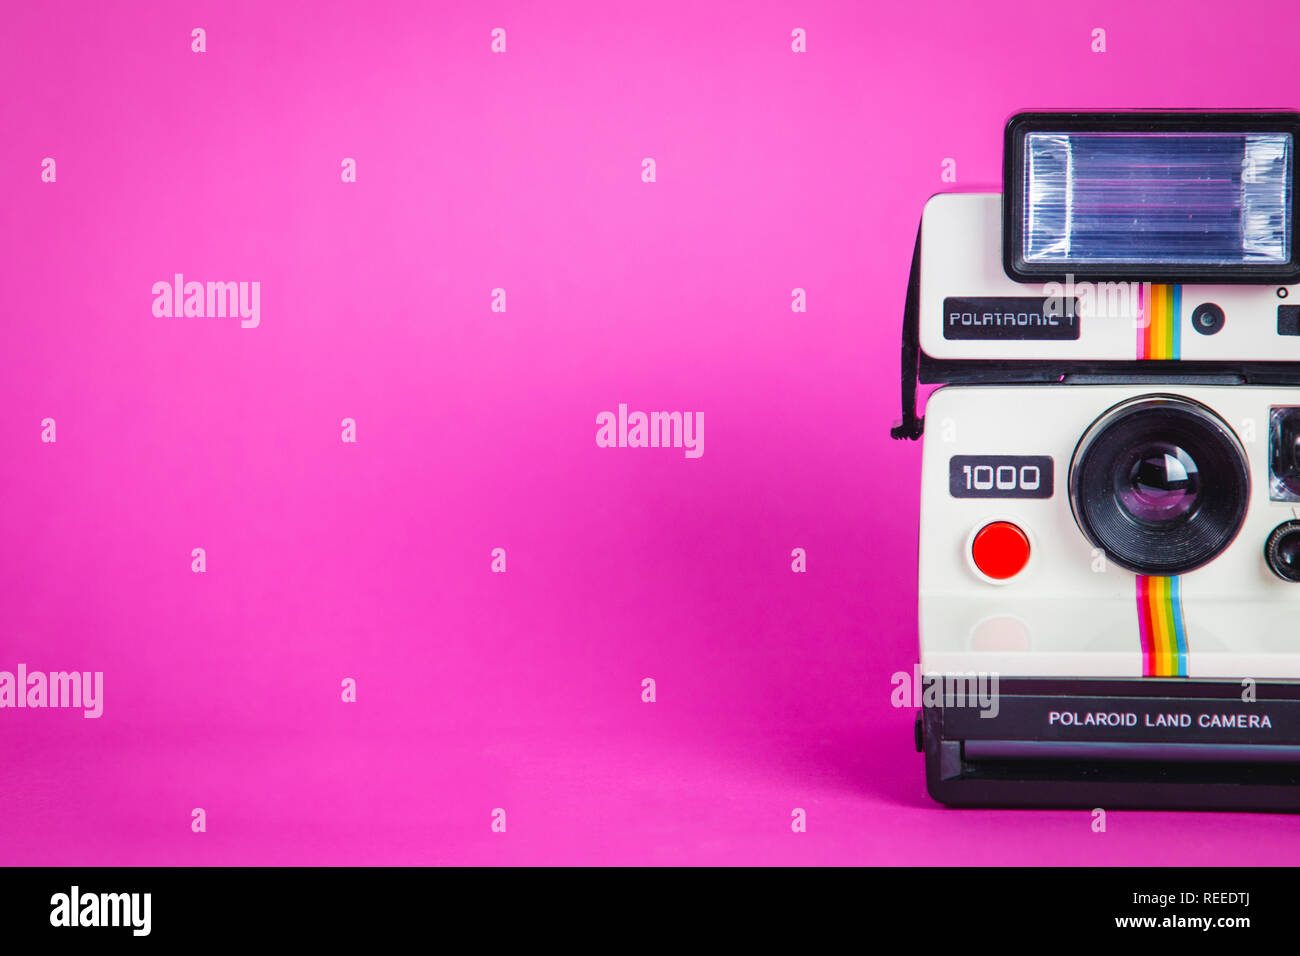 Polaroid photo camera on vibrant pink background with text Say Cheese Stock  Photo - Alamy